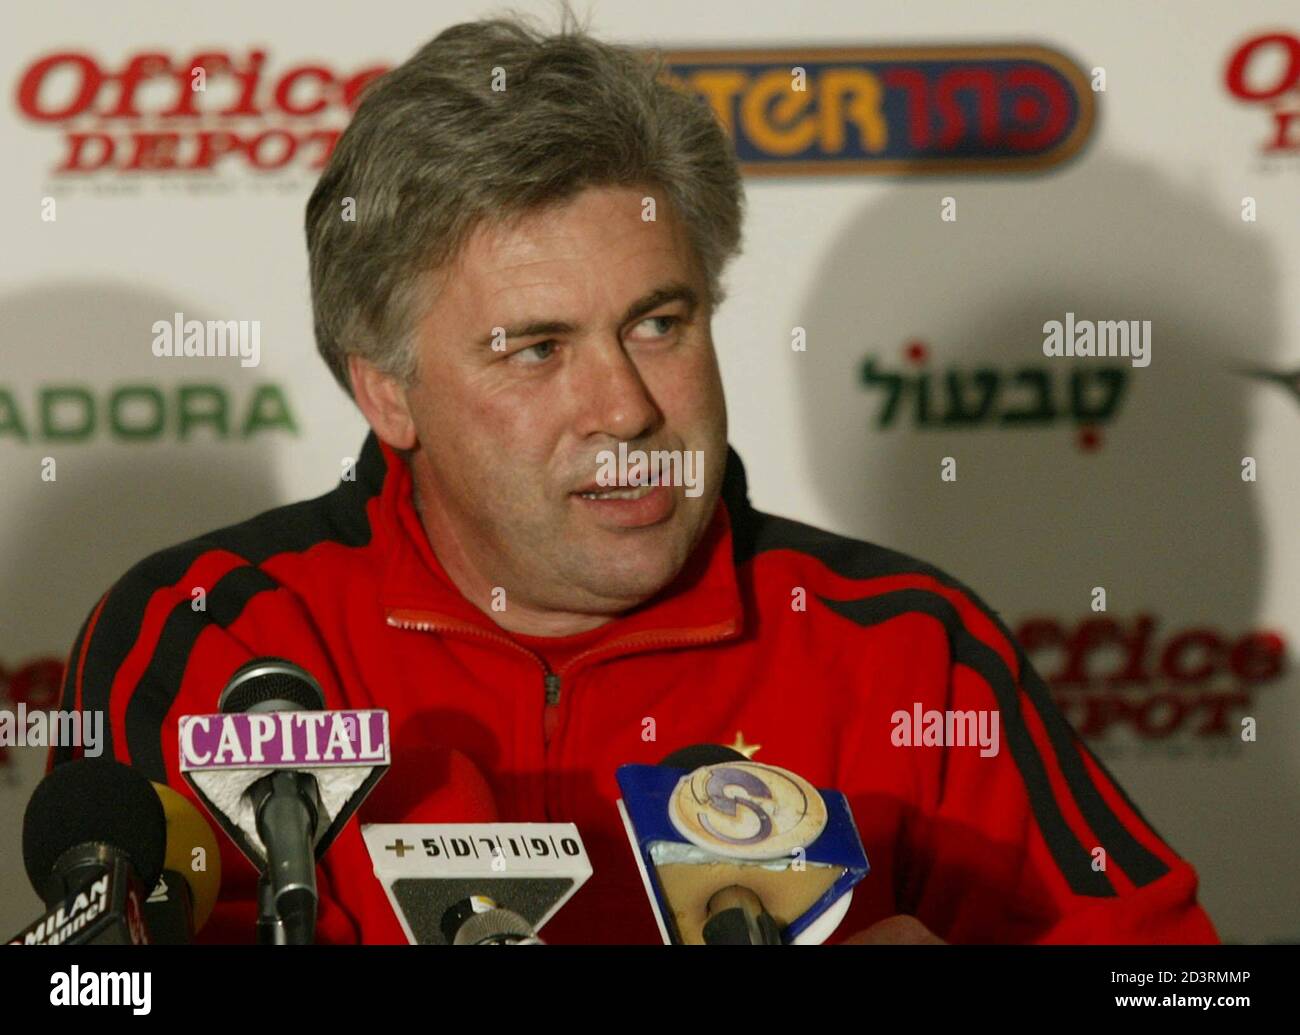 AC Milan coach Carlo Ancelotti talks to journalists during a press  conference in Nicosia March 13, 2002. AC Milan play Hapoel Tel Aviv here in  a UEFA Cup quarter final first leg